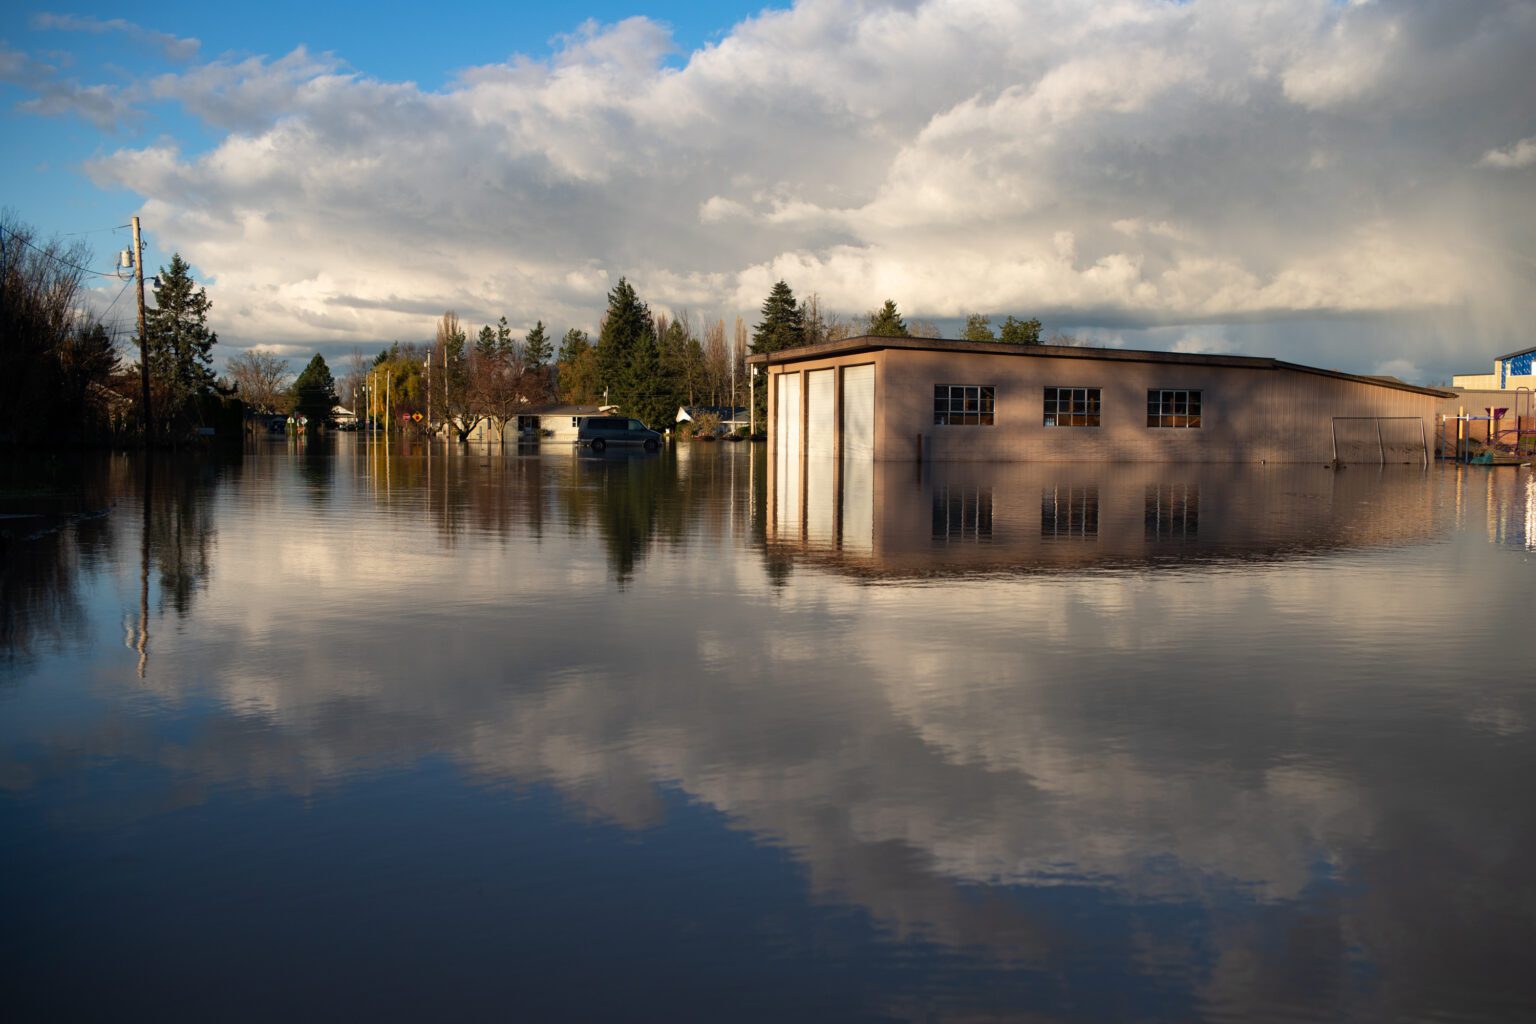 Water floods the street in front of Sumas Elementary School during the November 2021 floods. Thousands of properties were damaged across the region